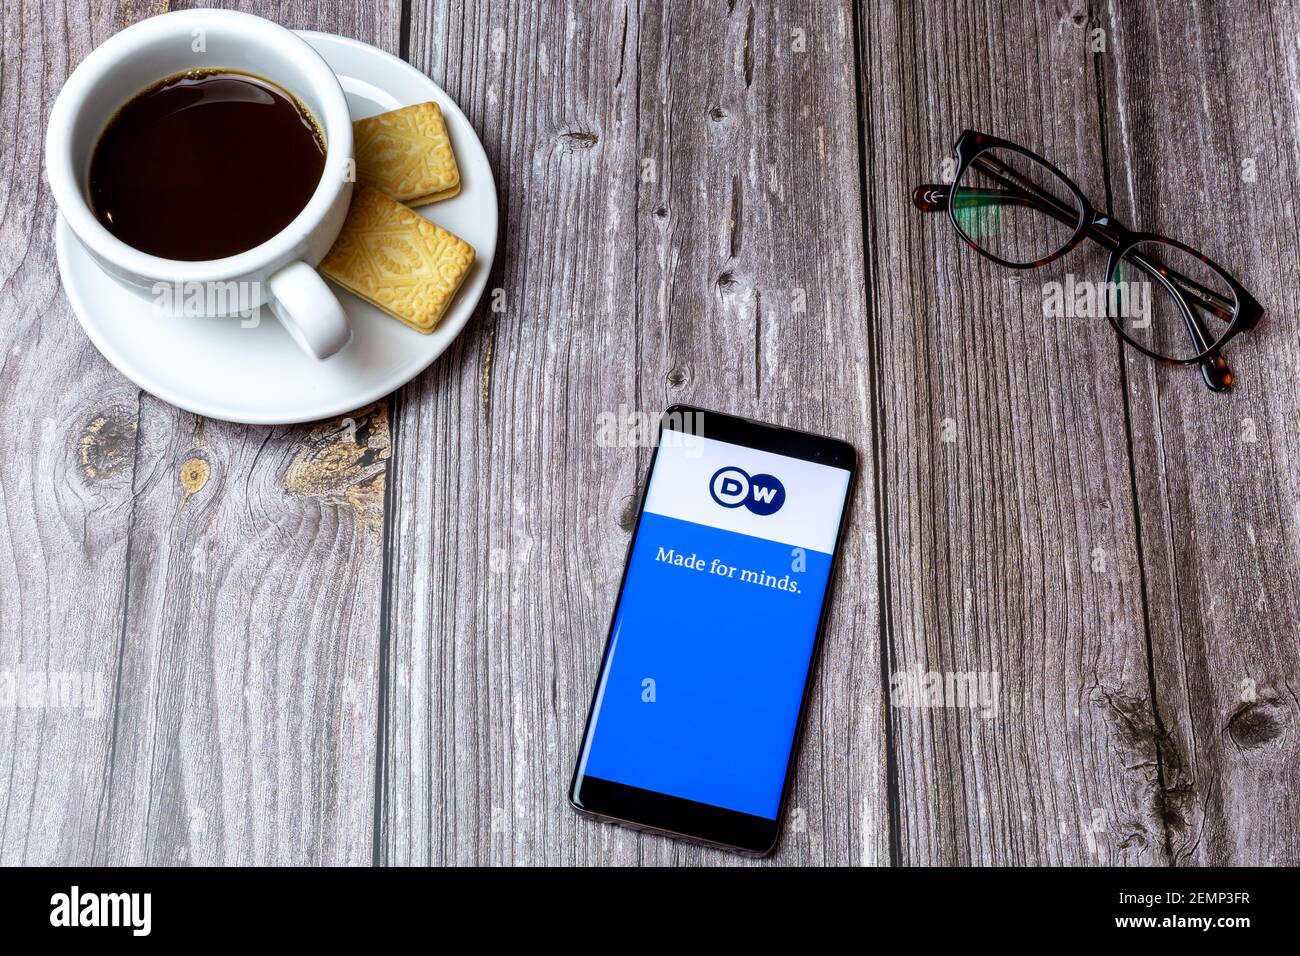 A mobile phone or cell phone on a wooden table with the Deutsche welle app open next to a coffee and glasses Stock Photo